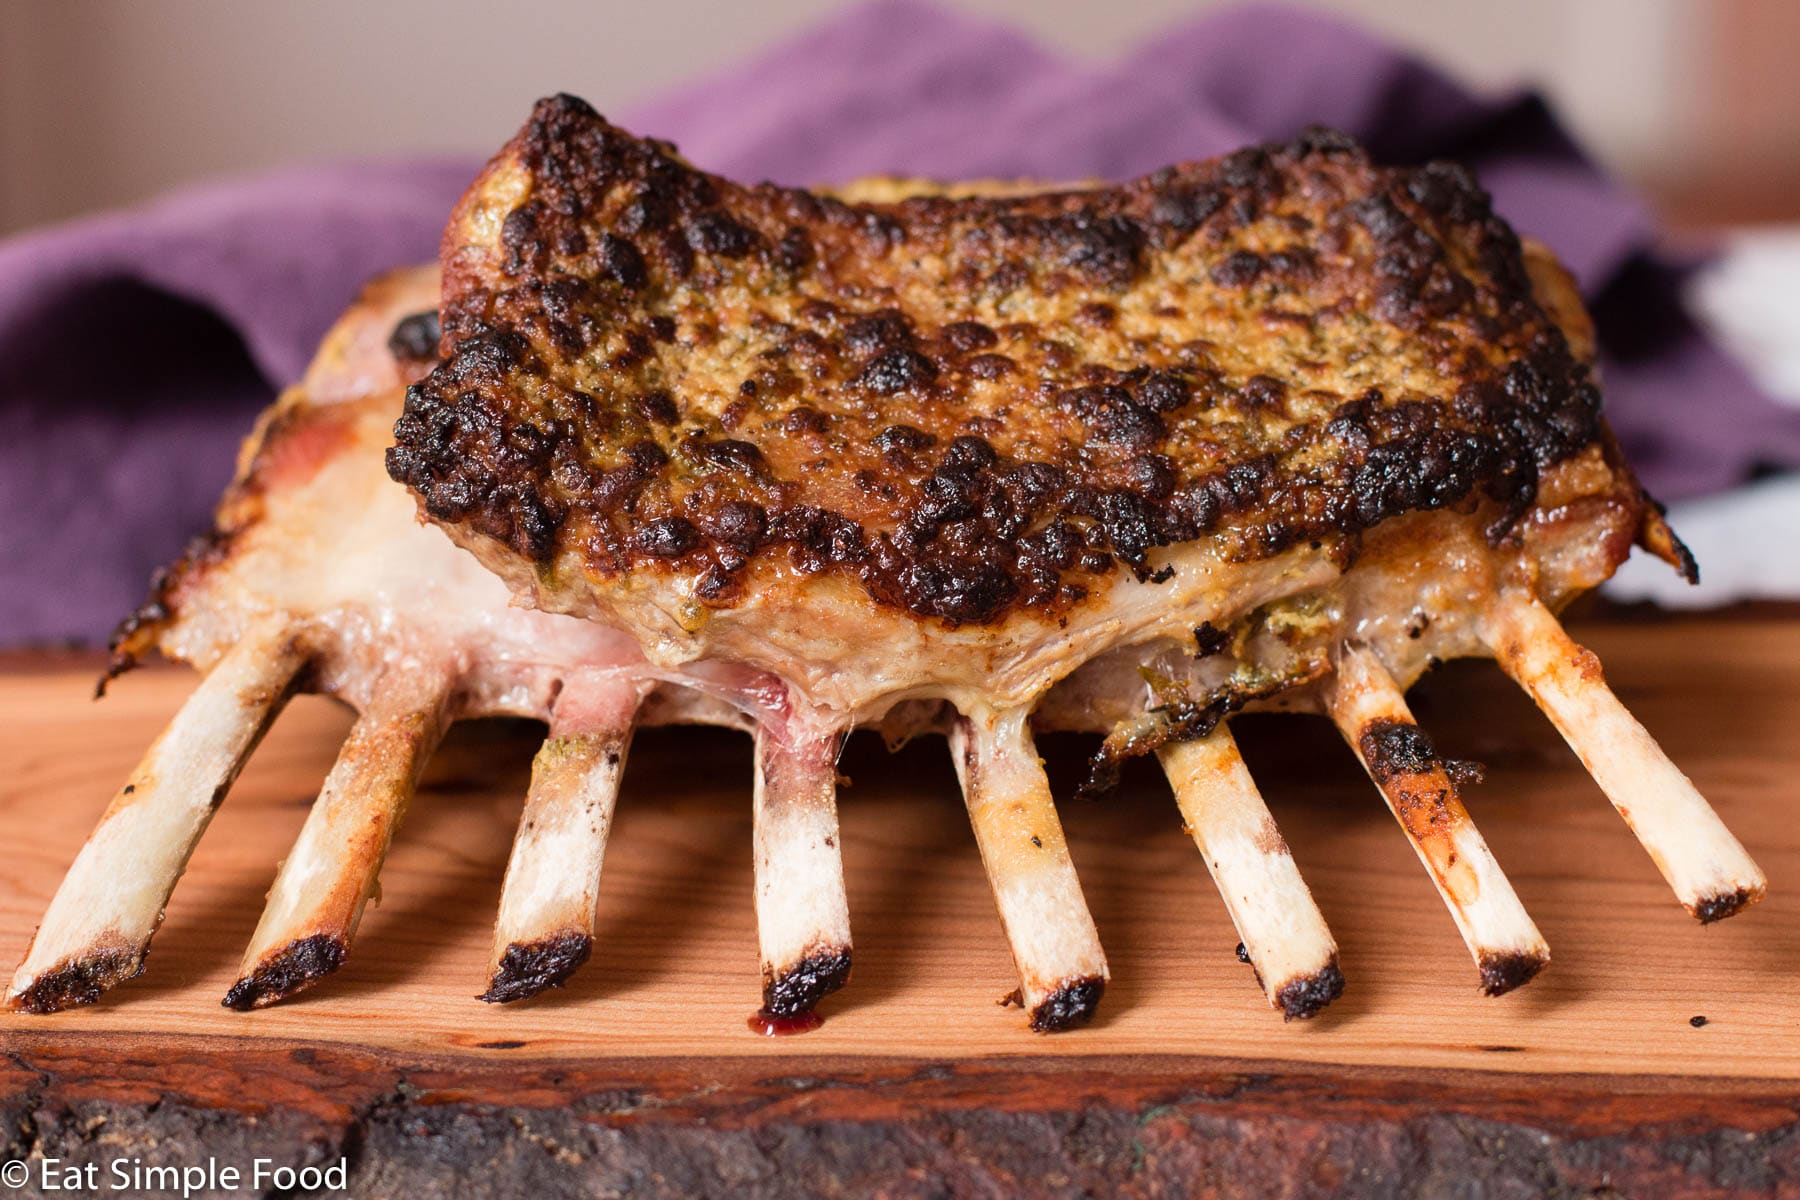 Whole Cooked Rack Of Lamb Recipe on Live Edge Wood Cutting Board